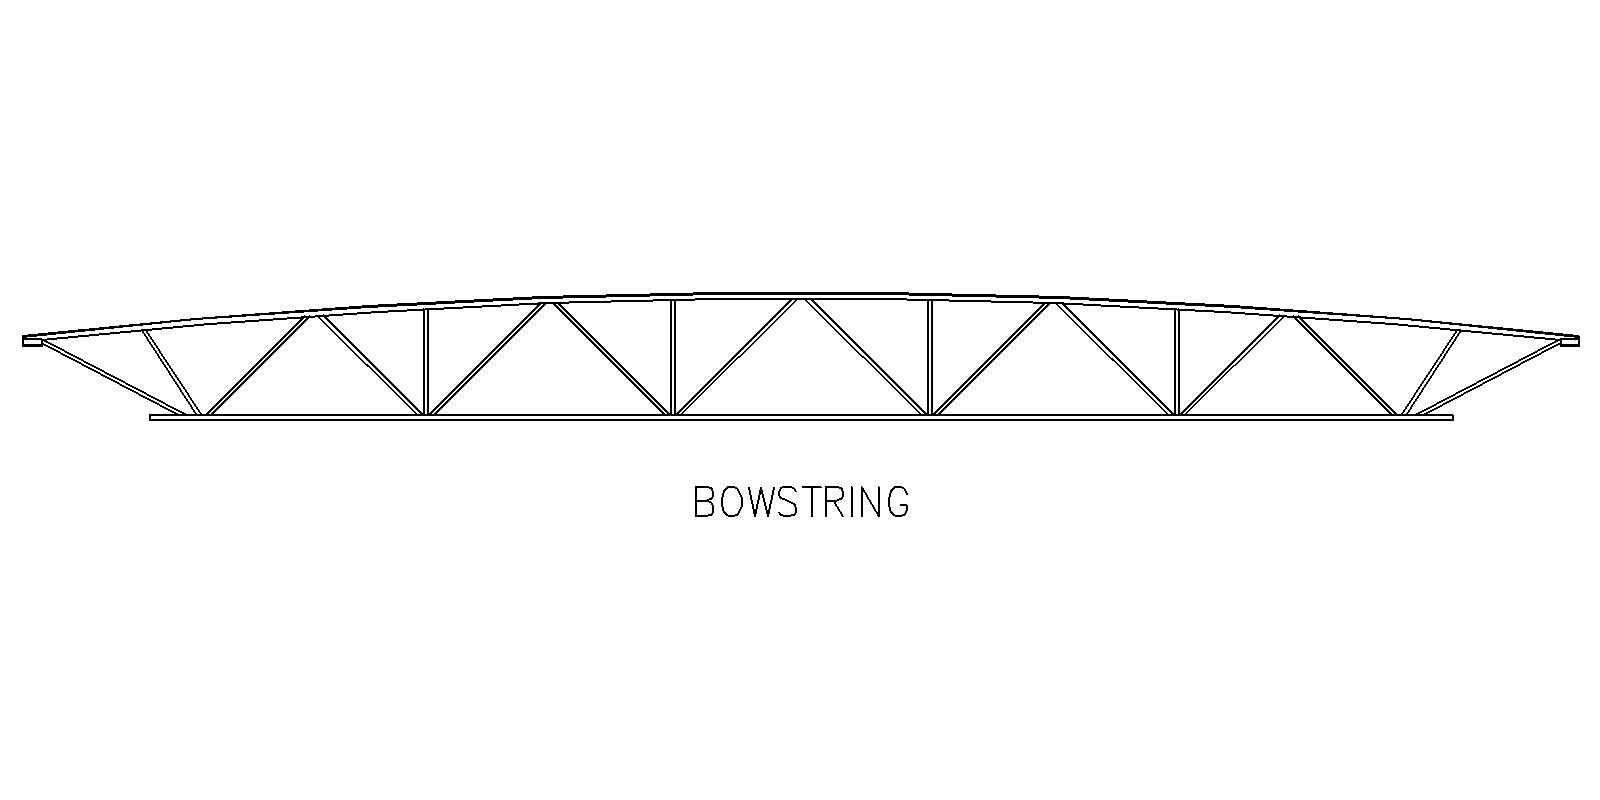 Gooder-Henrichsen is capable of manufacturing and engineering specialty joists, such as bowstring profile